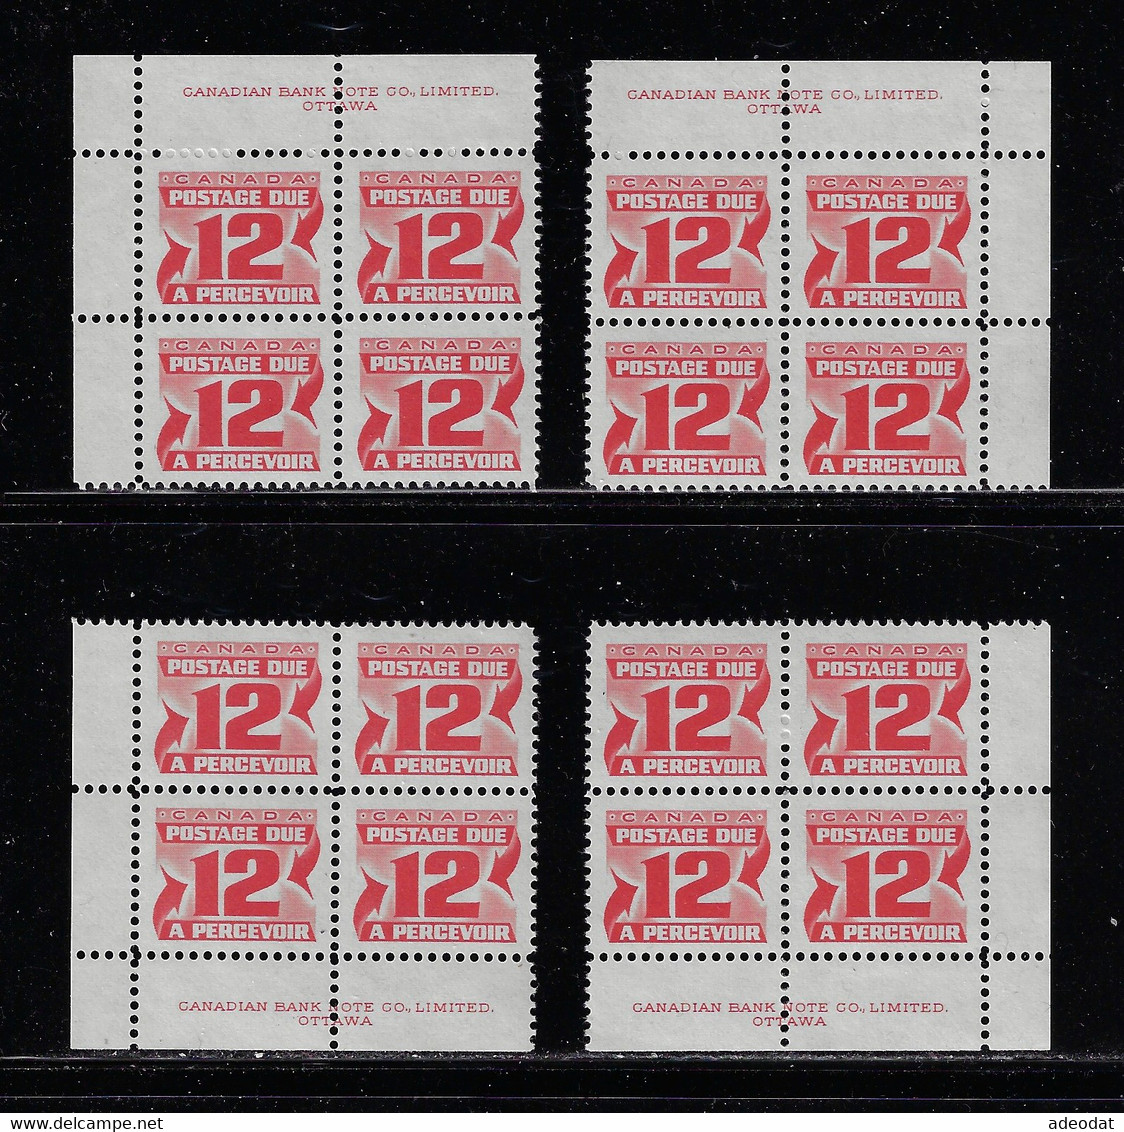 CANADA 1973 POSTAGE DUES SECOND ISSUE UNITRADE J35i, J36i 4 CB MNH - Postage Due